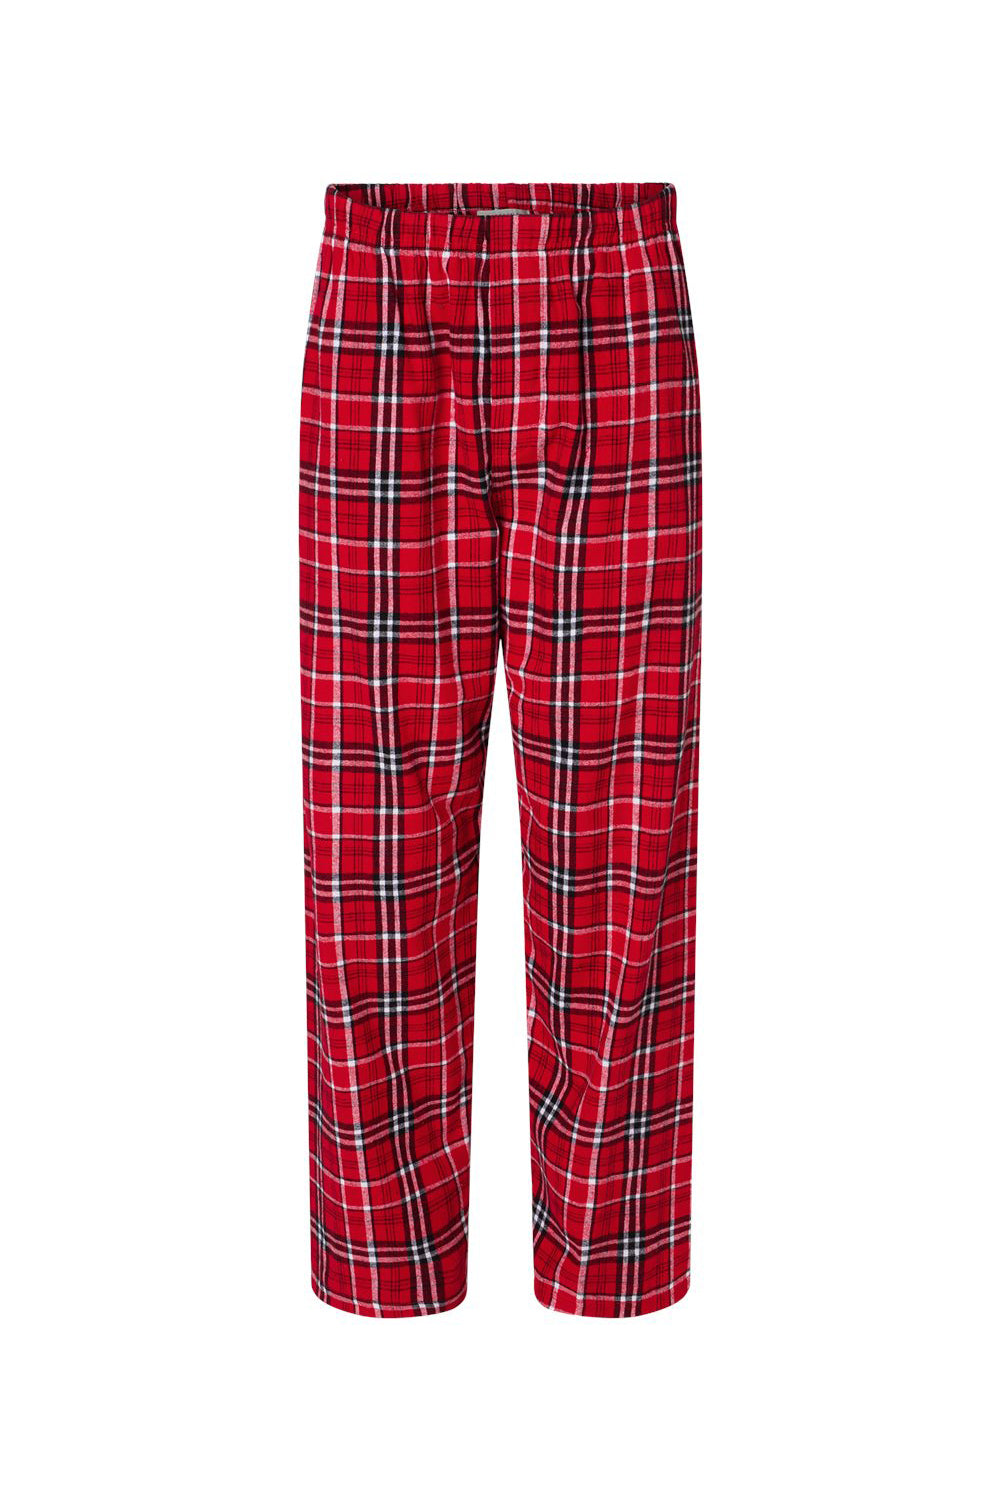 Boxercraft BM6624 Mens Harley Flannel Pants Red/White Flat Front